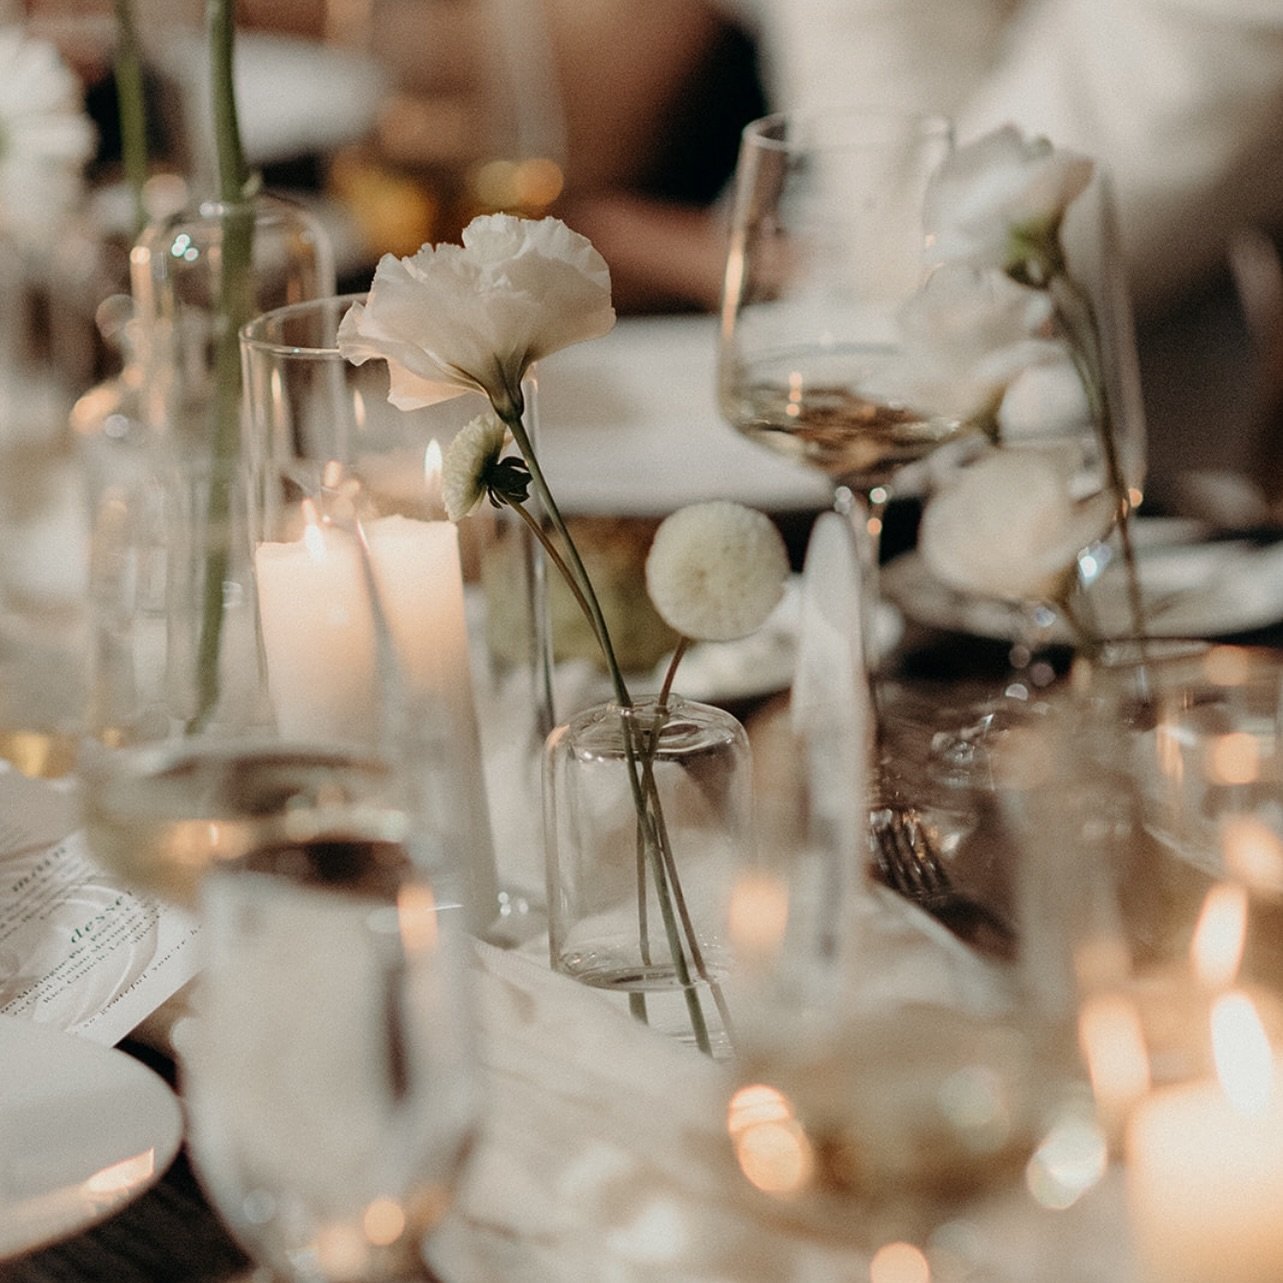 Feeling moody? Me too!! But in the best way. 

How to achieve this? 

Layers upon layers in candles, bud vases and linen runners. 
And have Jess @daringwanderer capture the magic ✨

Venue- @steamwhistlebrewing 
Planner- @stori.events 
Photographer- @